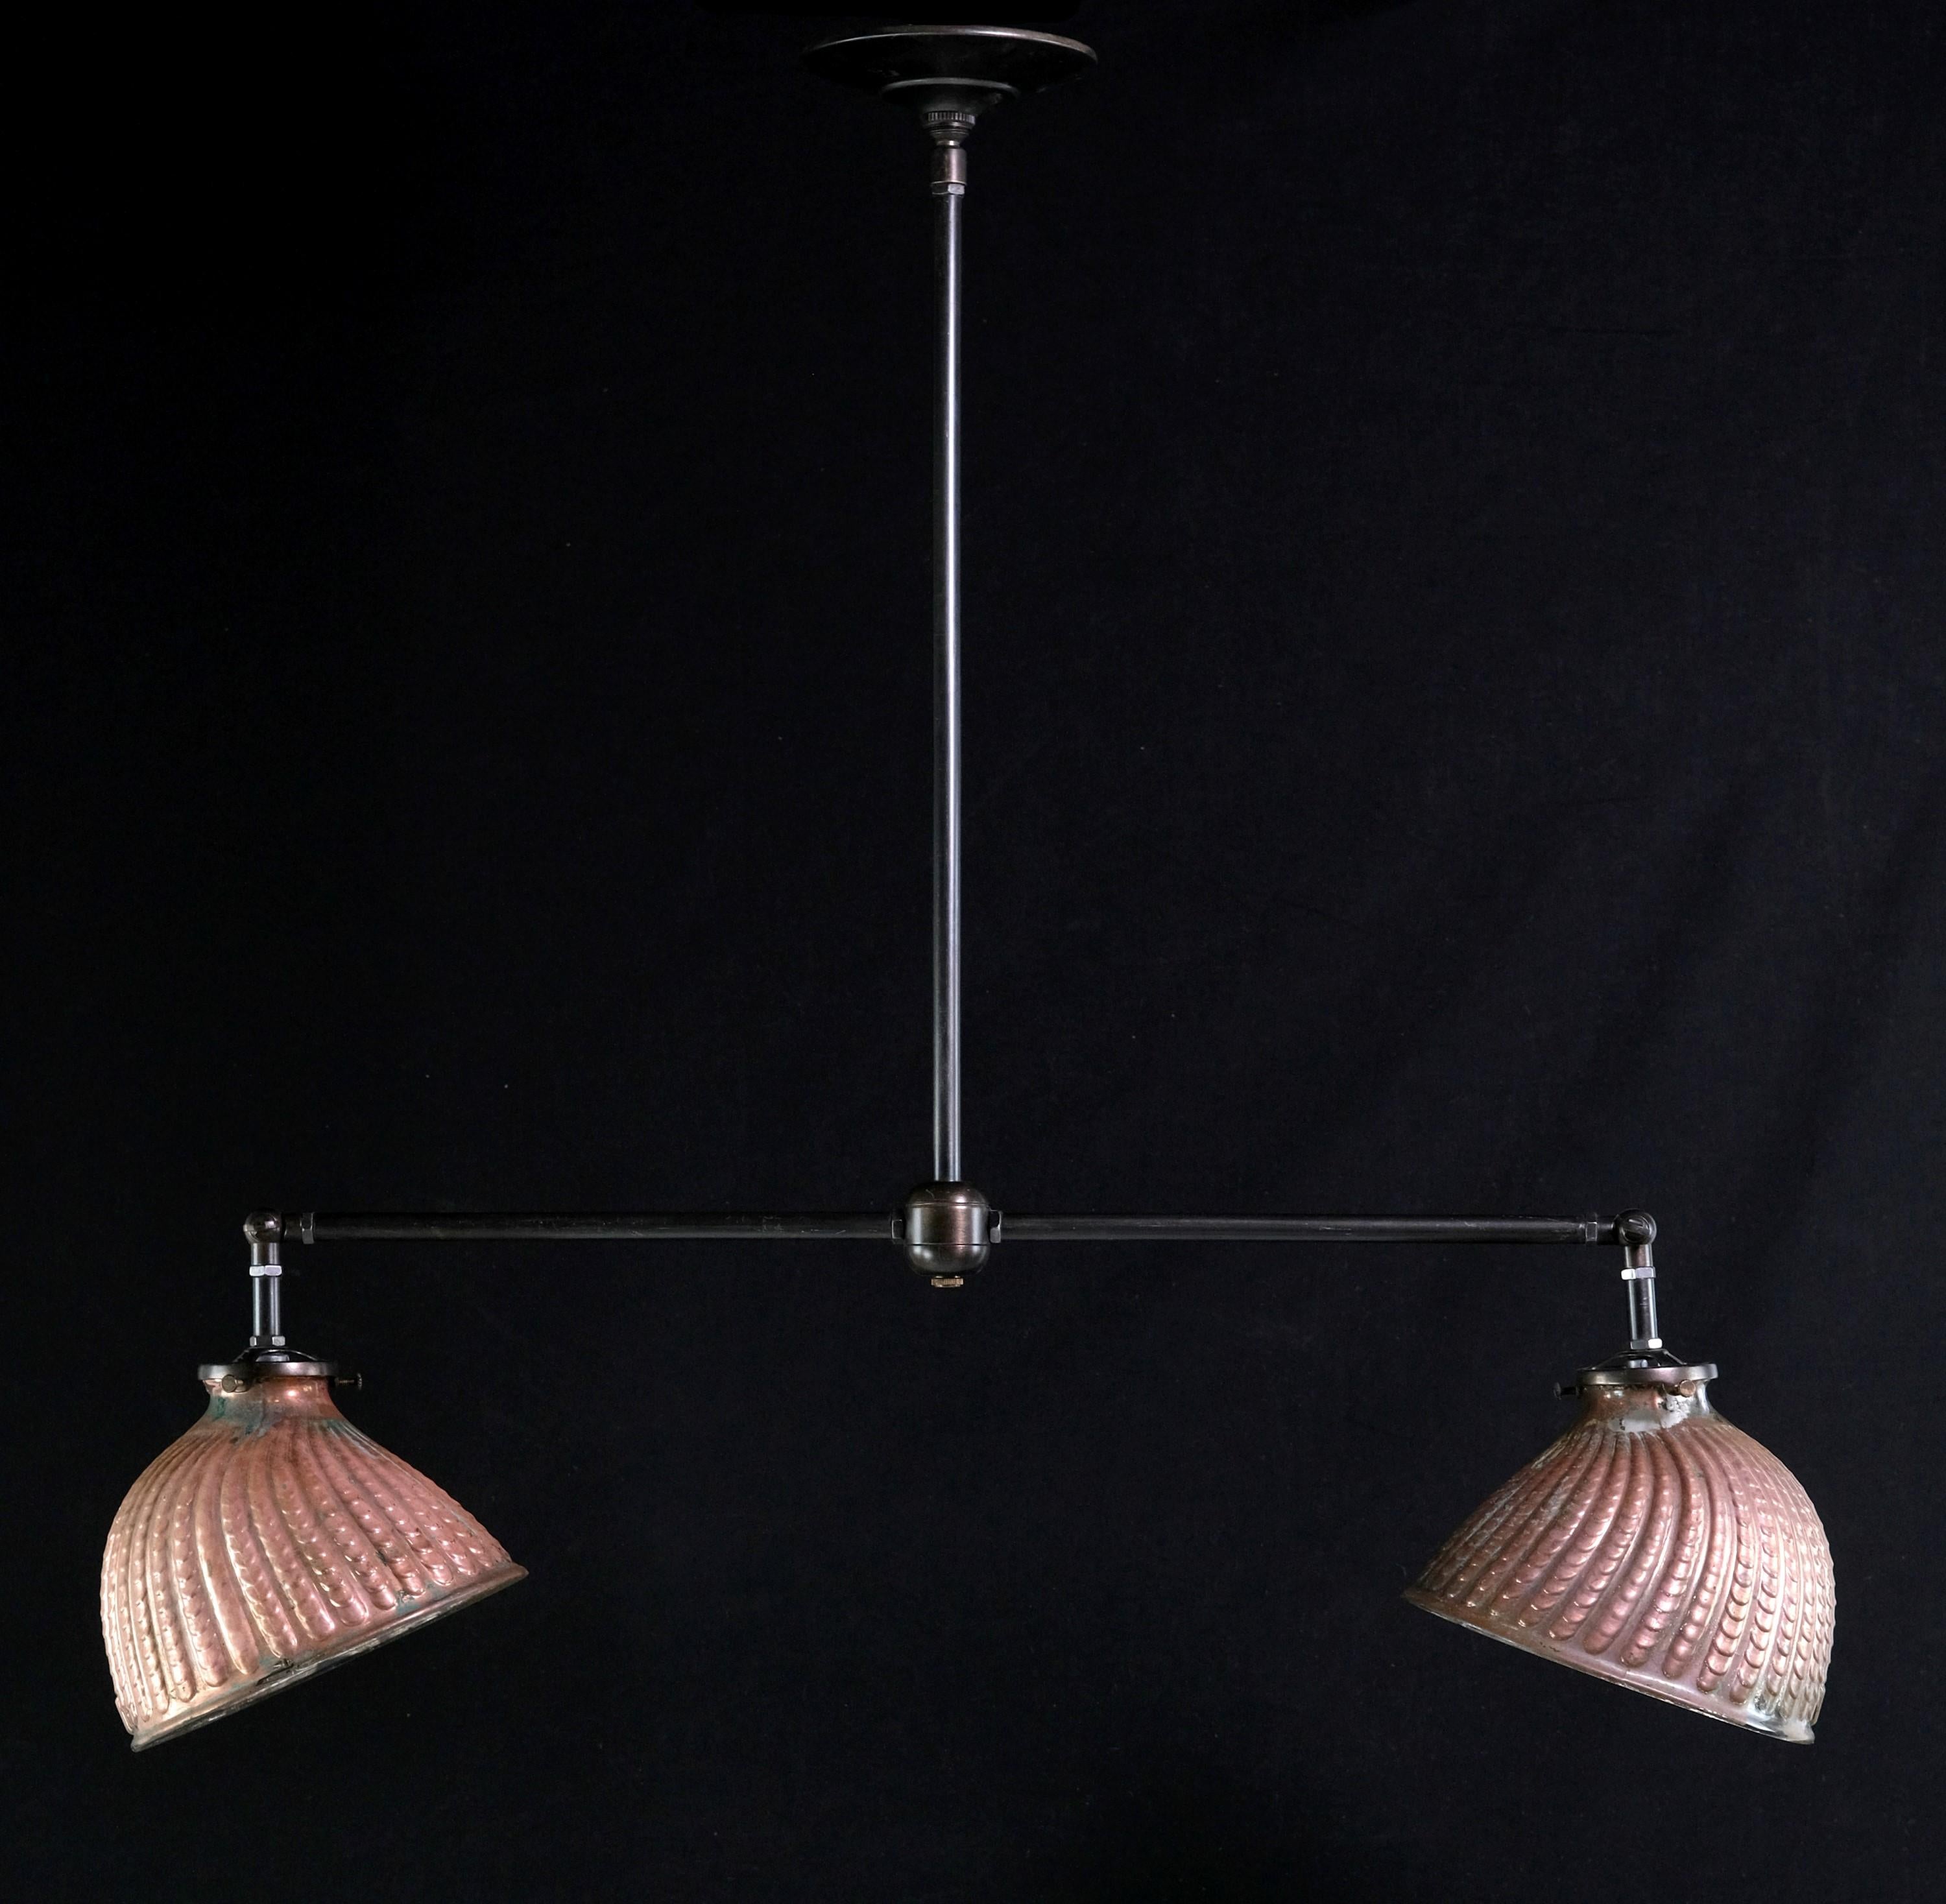 Two original 1910s copper plated mercury glass shades are repurposed into this double headed brass pendant light. Great for kitchen islands. These unique shades are of a clam shell shape and have a unique ripple pattern molded into the glass. The